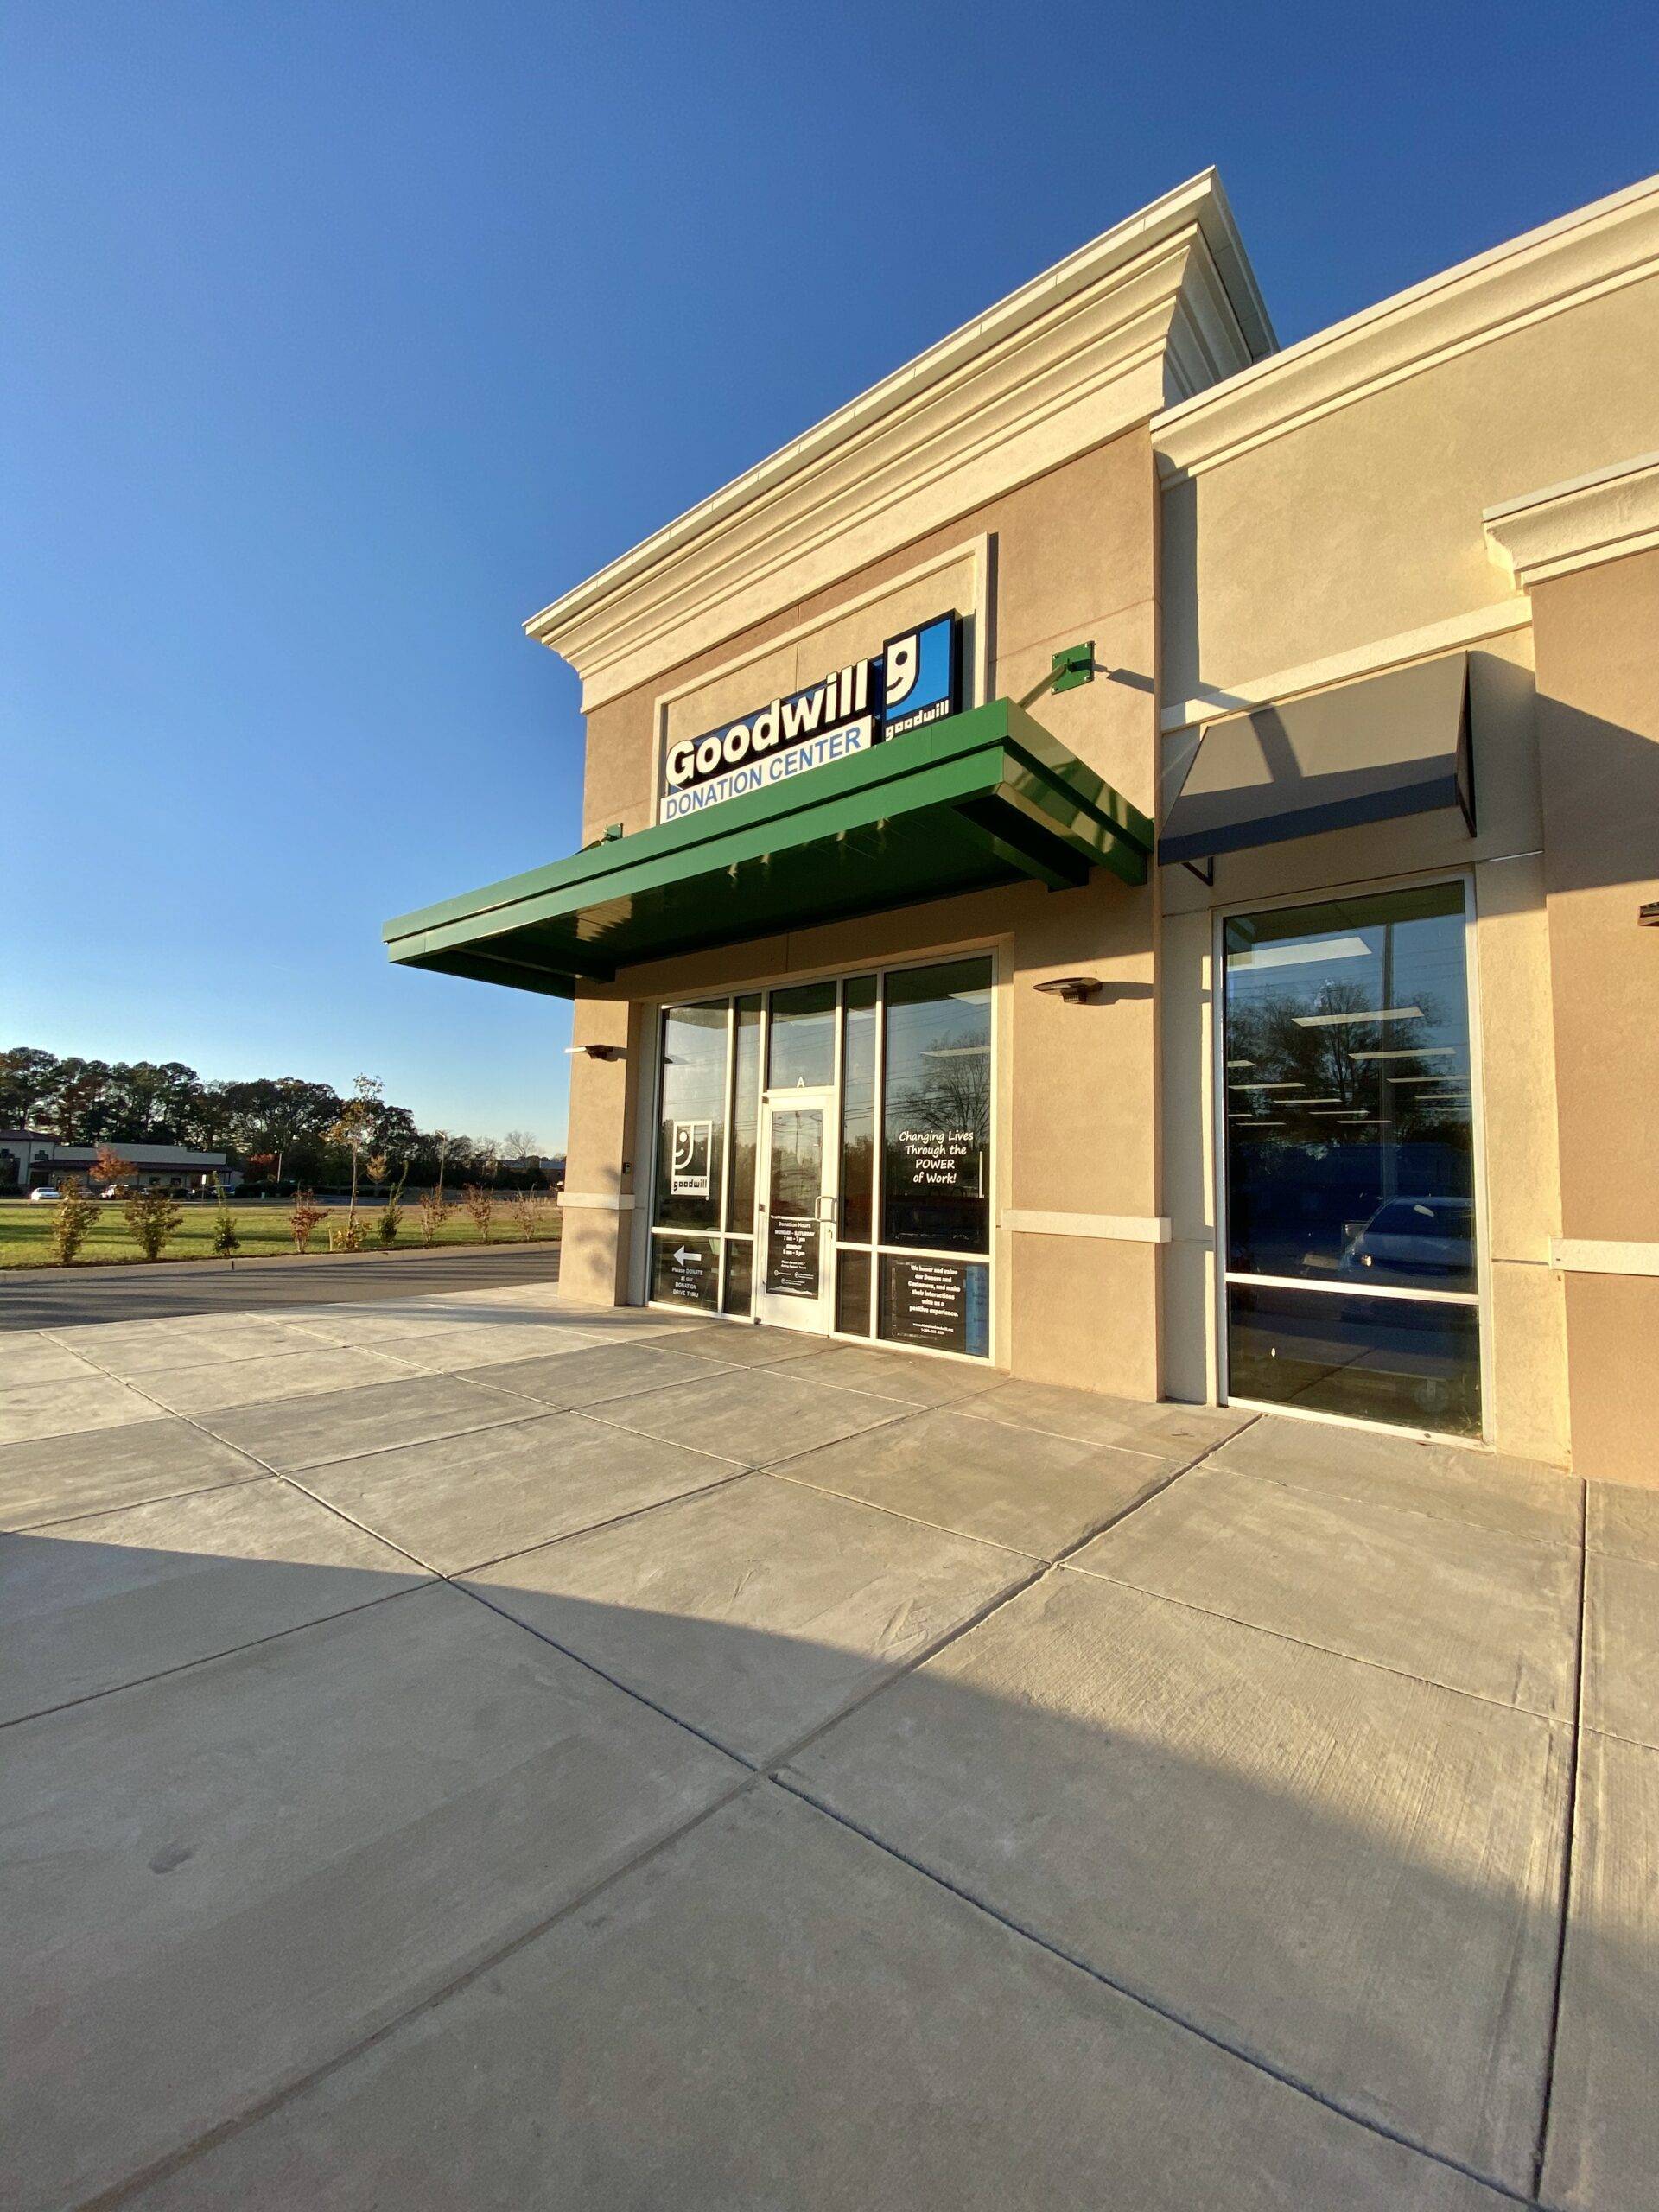 All Things Madison | How the New Goodwill Donation Center in Madison, Alabama Differs From a Thrift Store